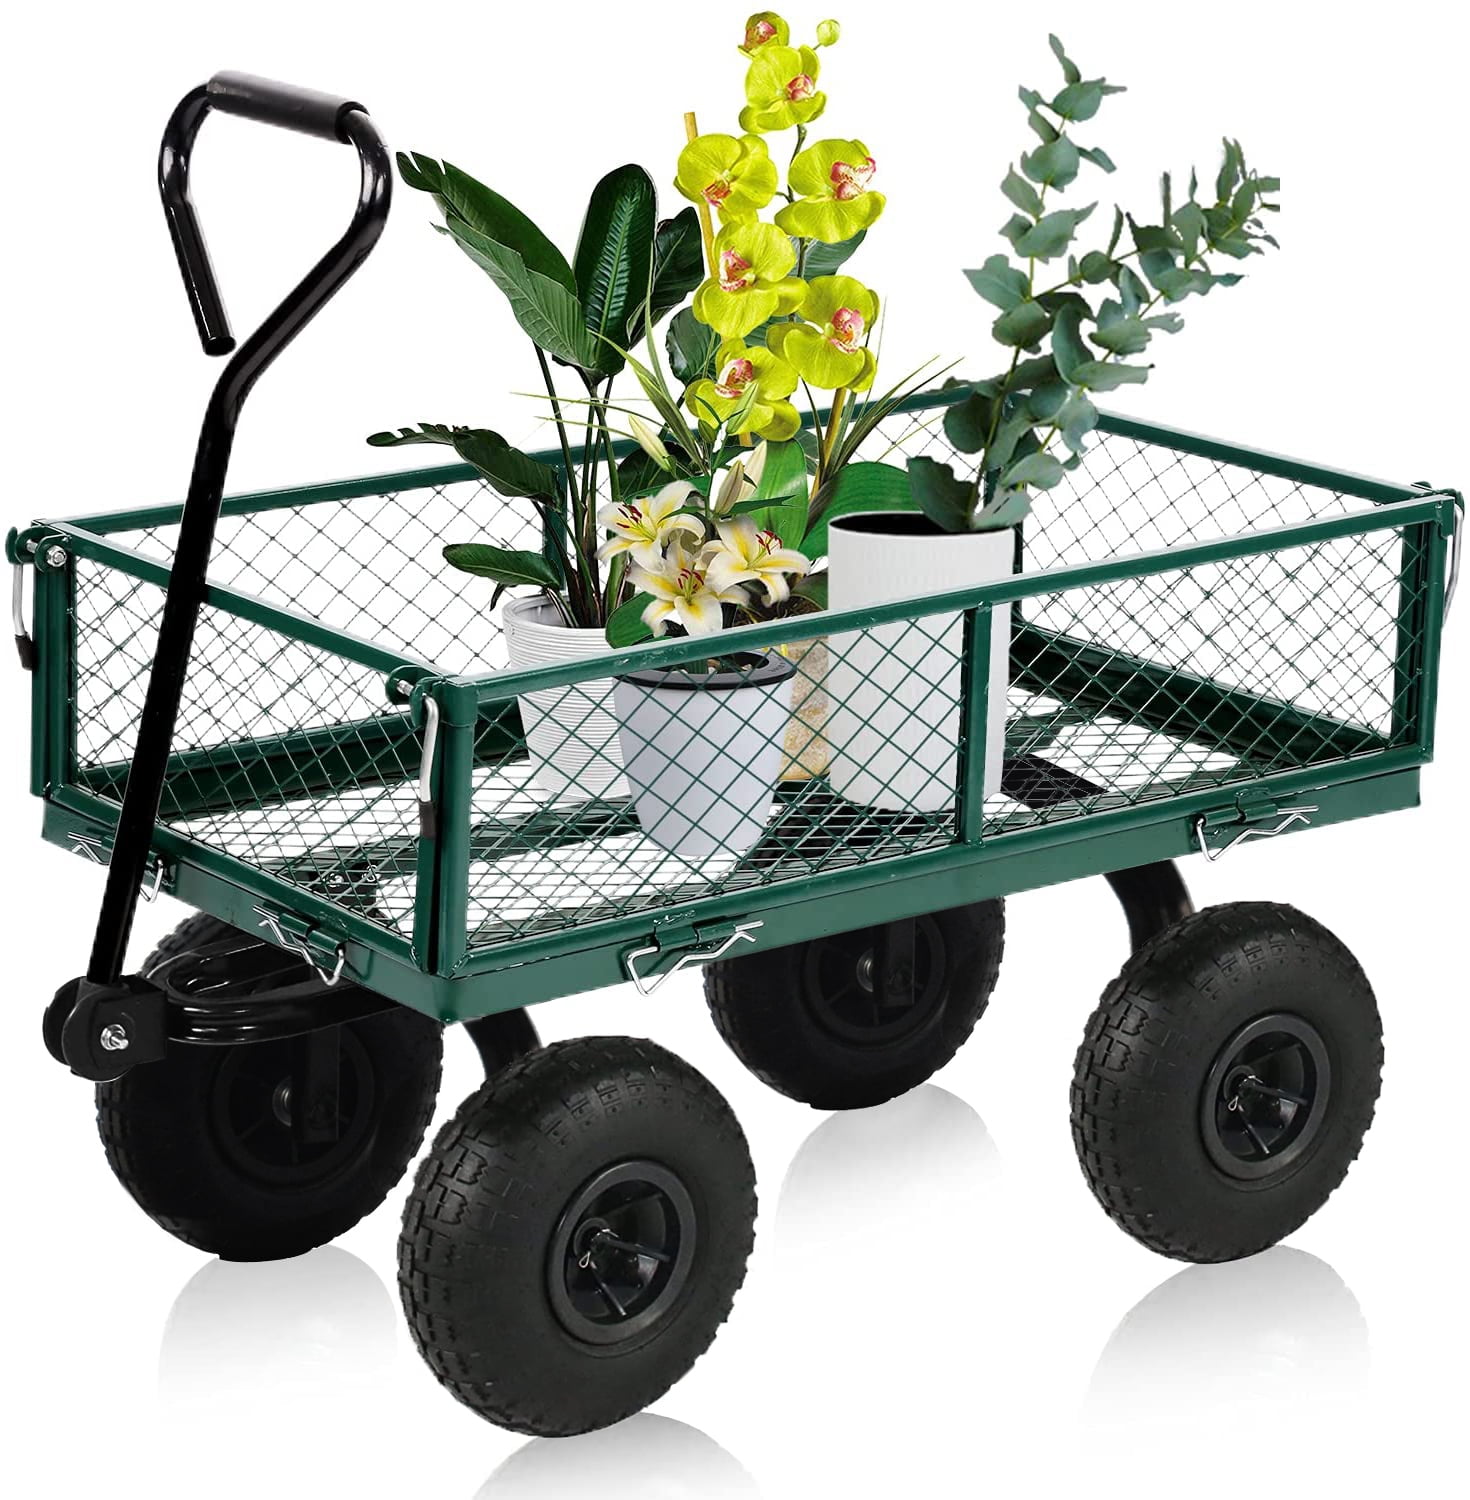 Green Garden Cart Heavy Duty Steel Utility Cart Yard Dump Wagon Cart Lawn Outdoor Utility Cart with Removable Sides and 10 Inch Wheels 